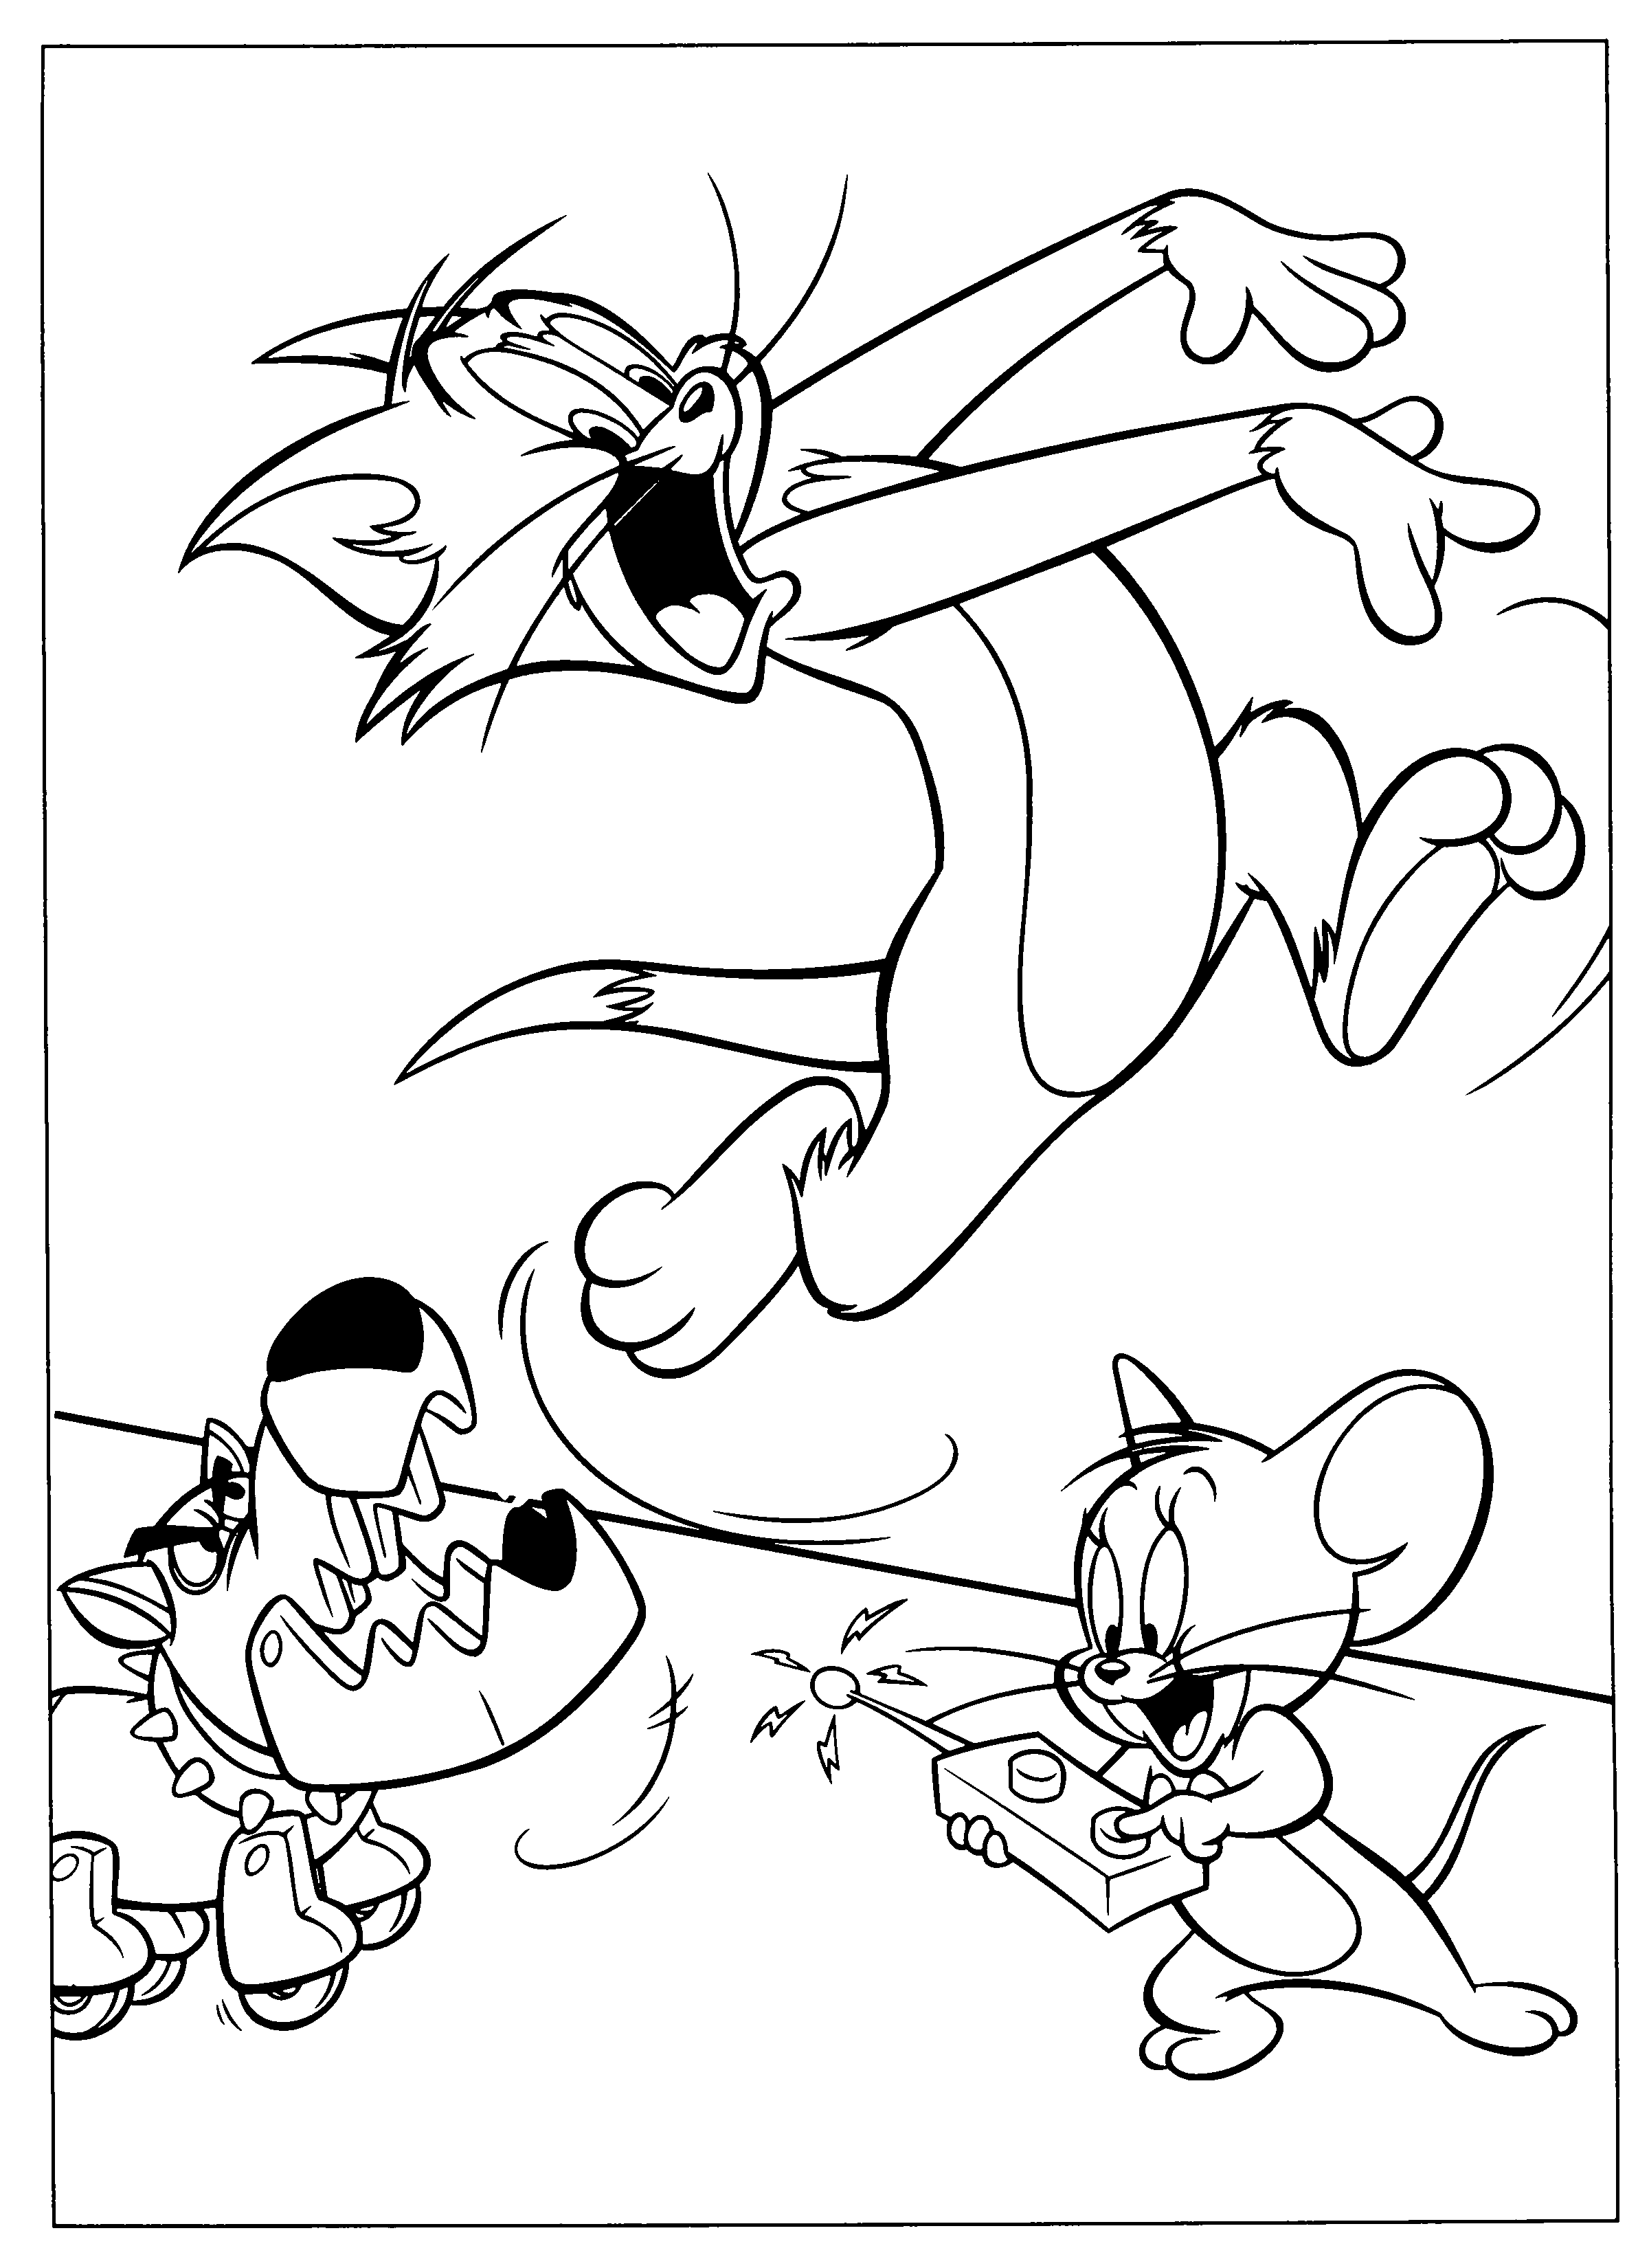 tom coloring pages tom and jerry cartoon coloring pages cartoon coloring pages tom pages coloring 